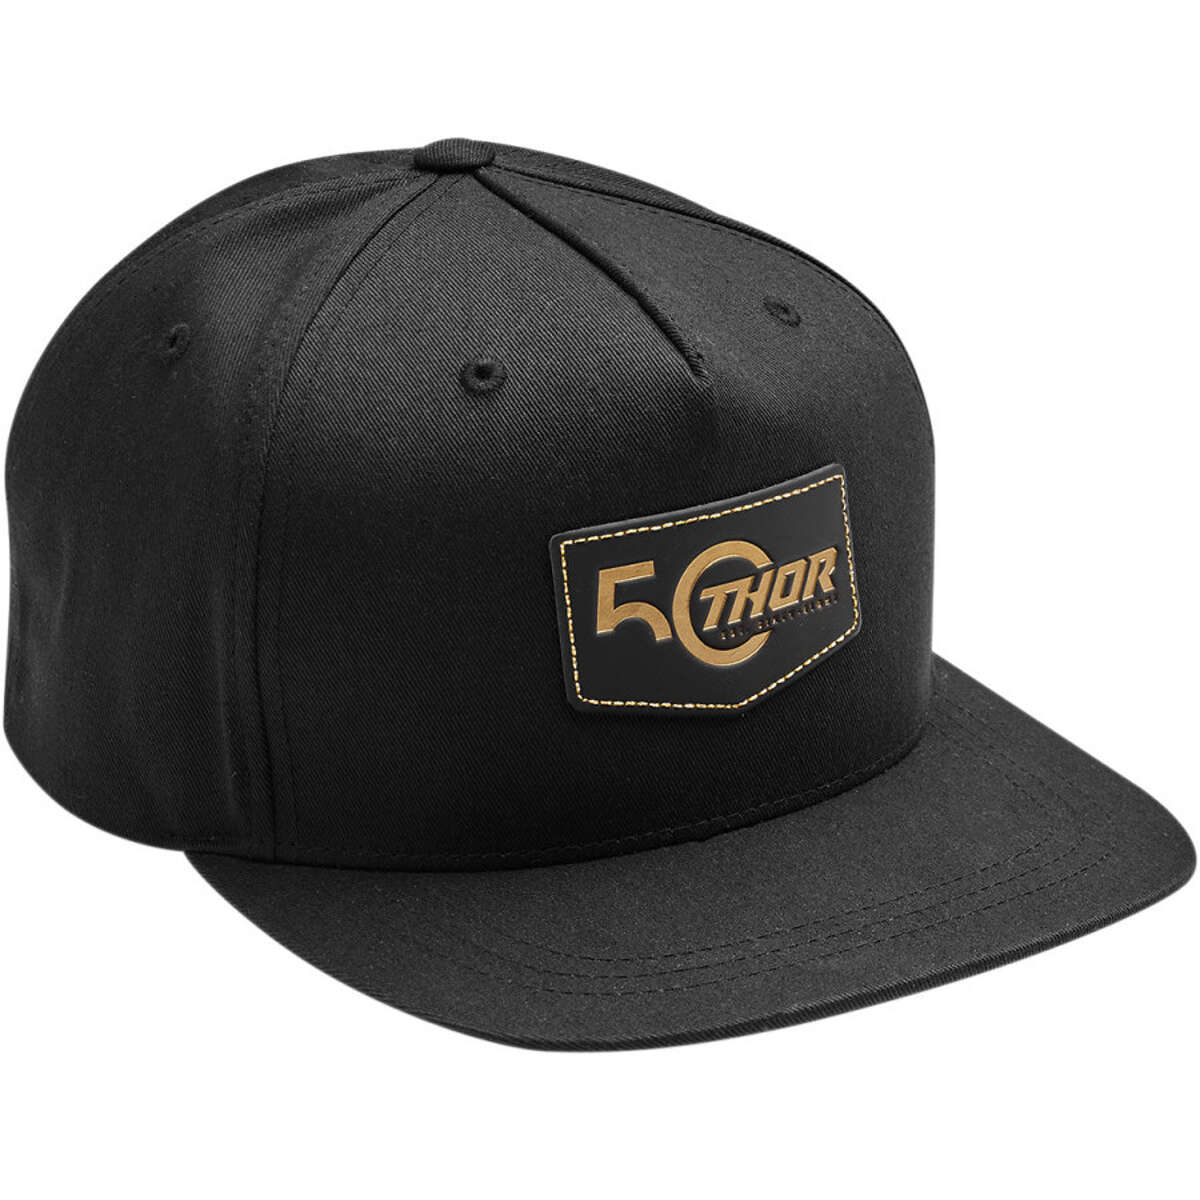 Thor Cappellino Snap Back 50th Anniversary s8 - Black/Gold